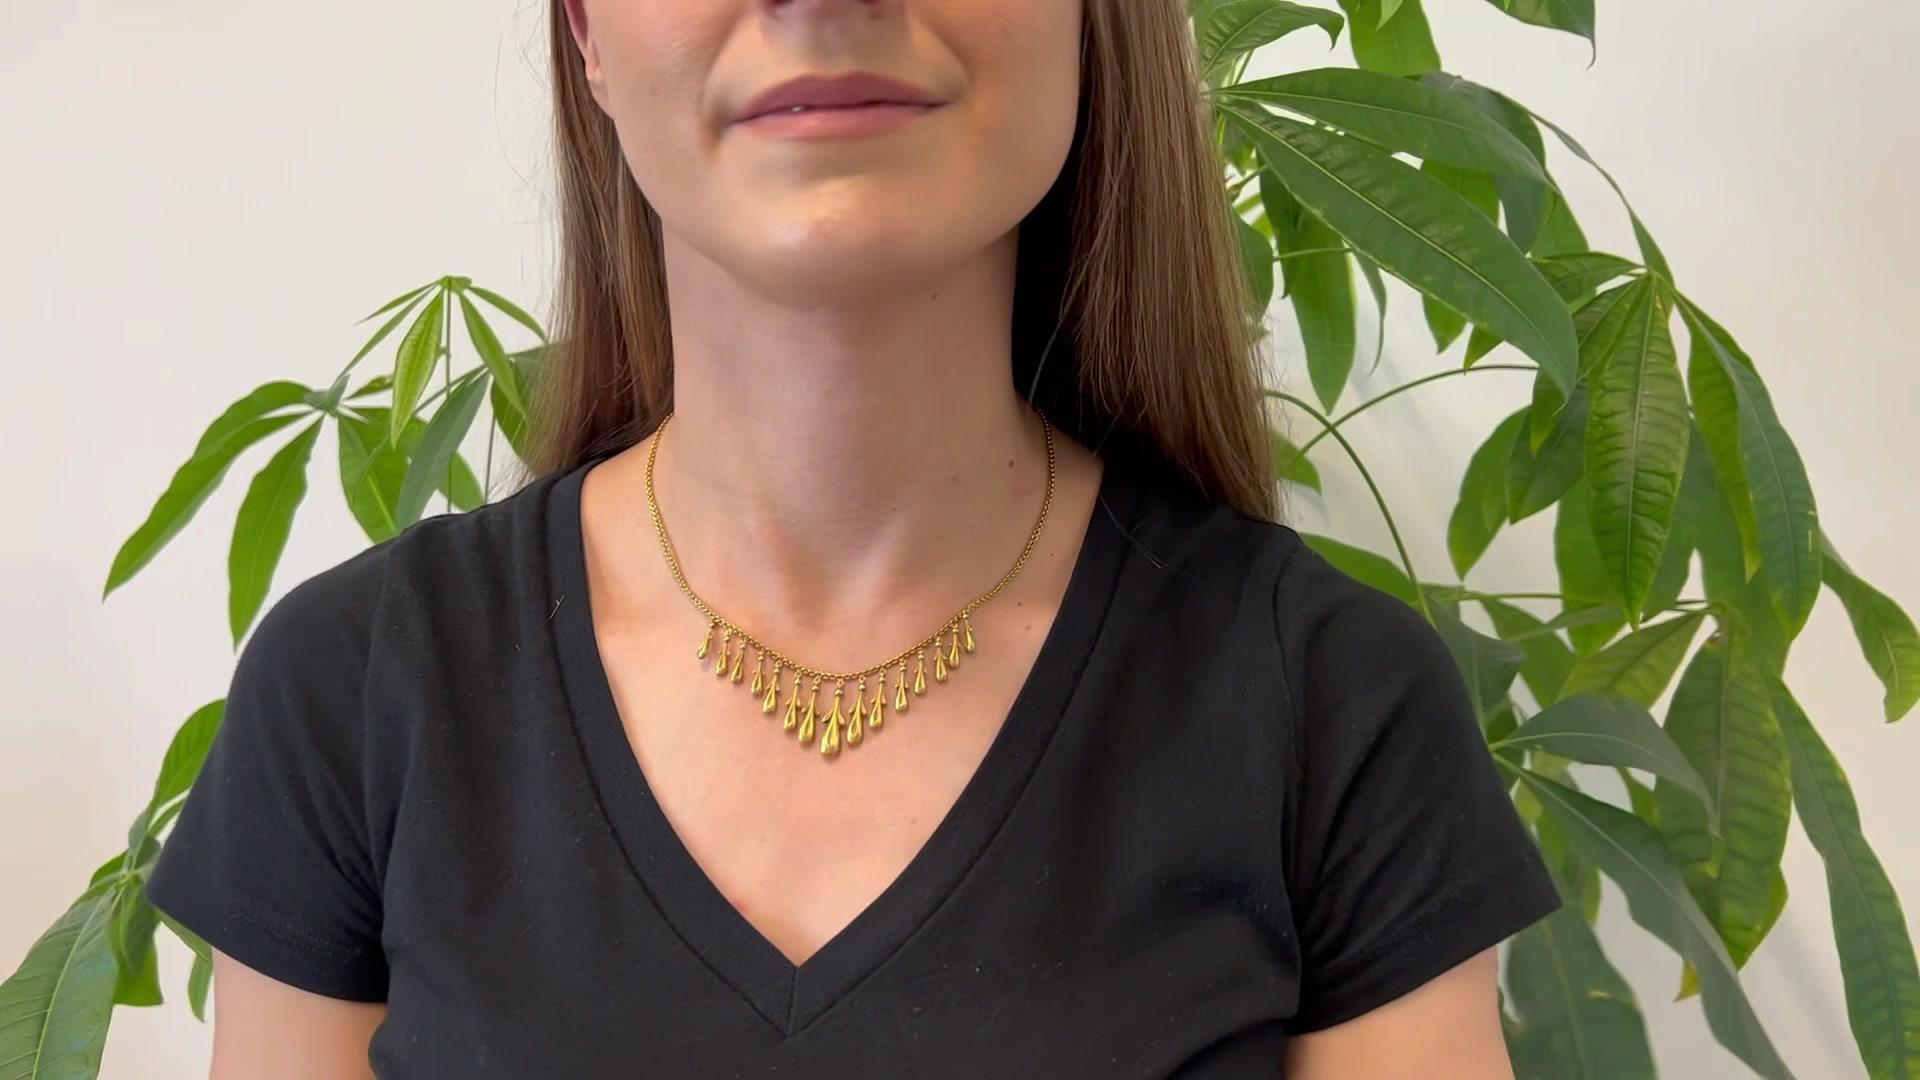 One Late Victorian 14k Yellow Gold Drop Fringe Necklace. Crafted in 14 karat yellow gold with purity marks, weighing 11.57 grams. Circa 1890. The necklace is 17 inches in length. 

About this Item: Evoking the elegance of the Late Victorian era,